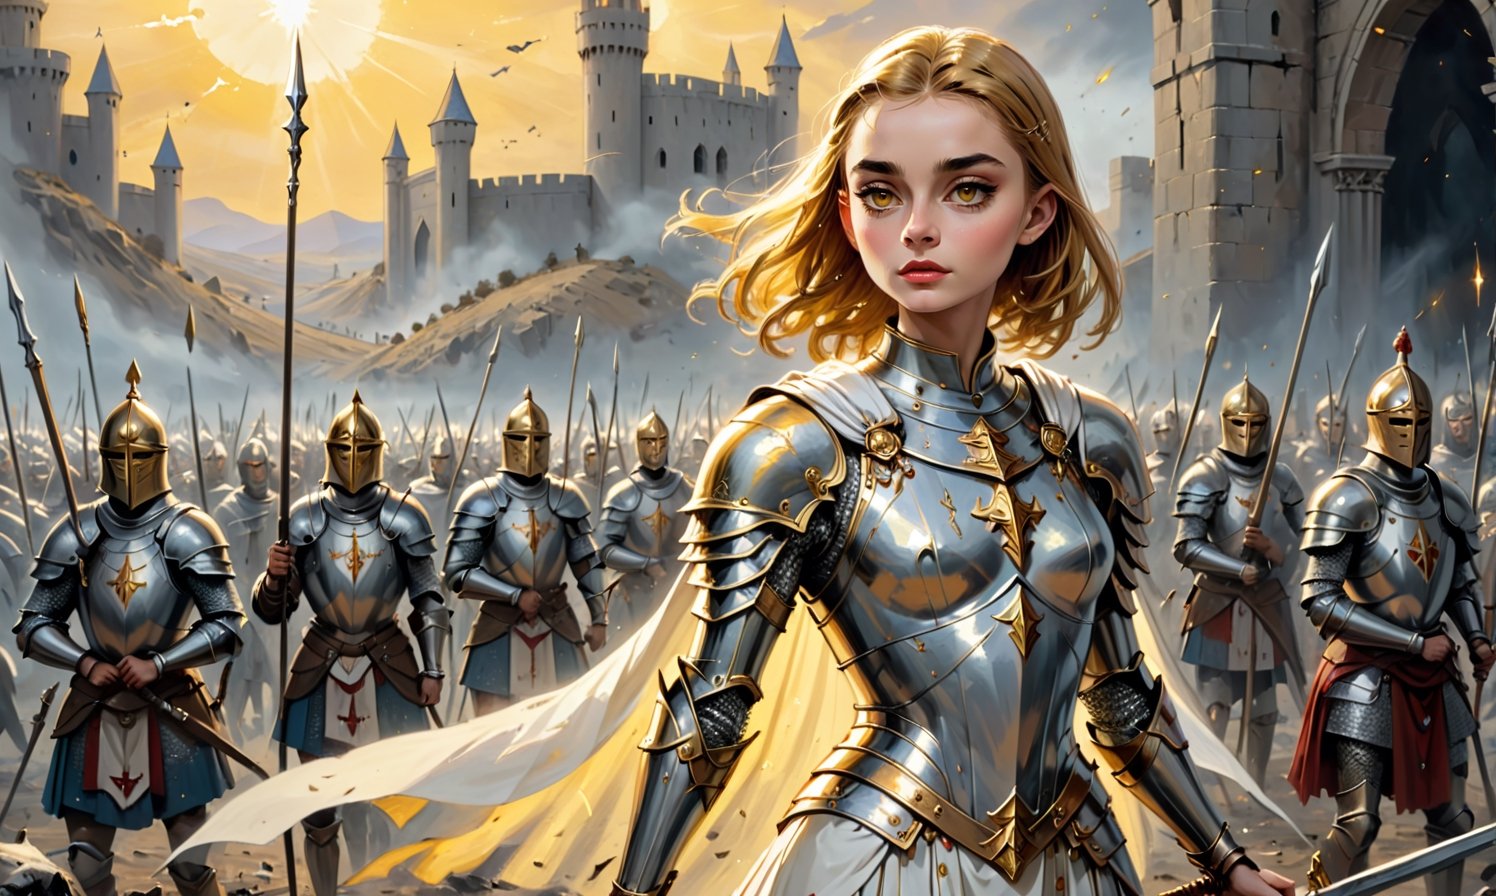 traditional painting in the style of Daria Rashev, depicting a warrior woman, looks like audrey hepburn, shining golden hair cut like joan of arc, glowing golden eyes, spear in right hand, silver crusader armour covered by a white and gold tabard, standing on a desolate batlefield, surrounded by dead knights, godrays shining behind